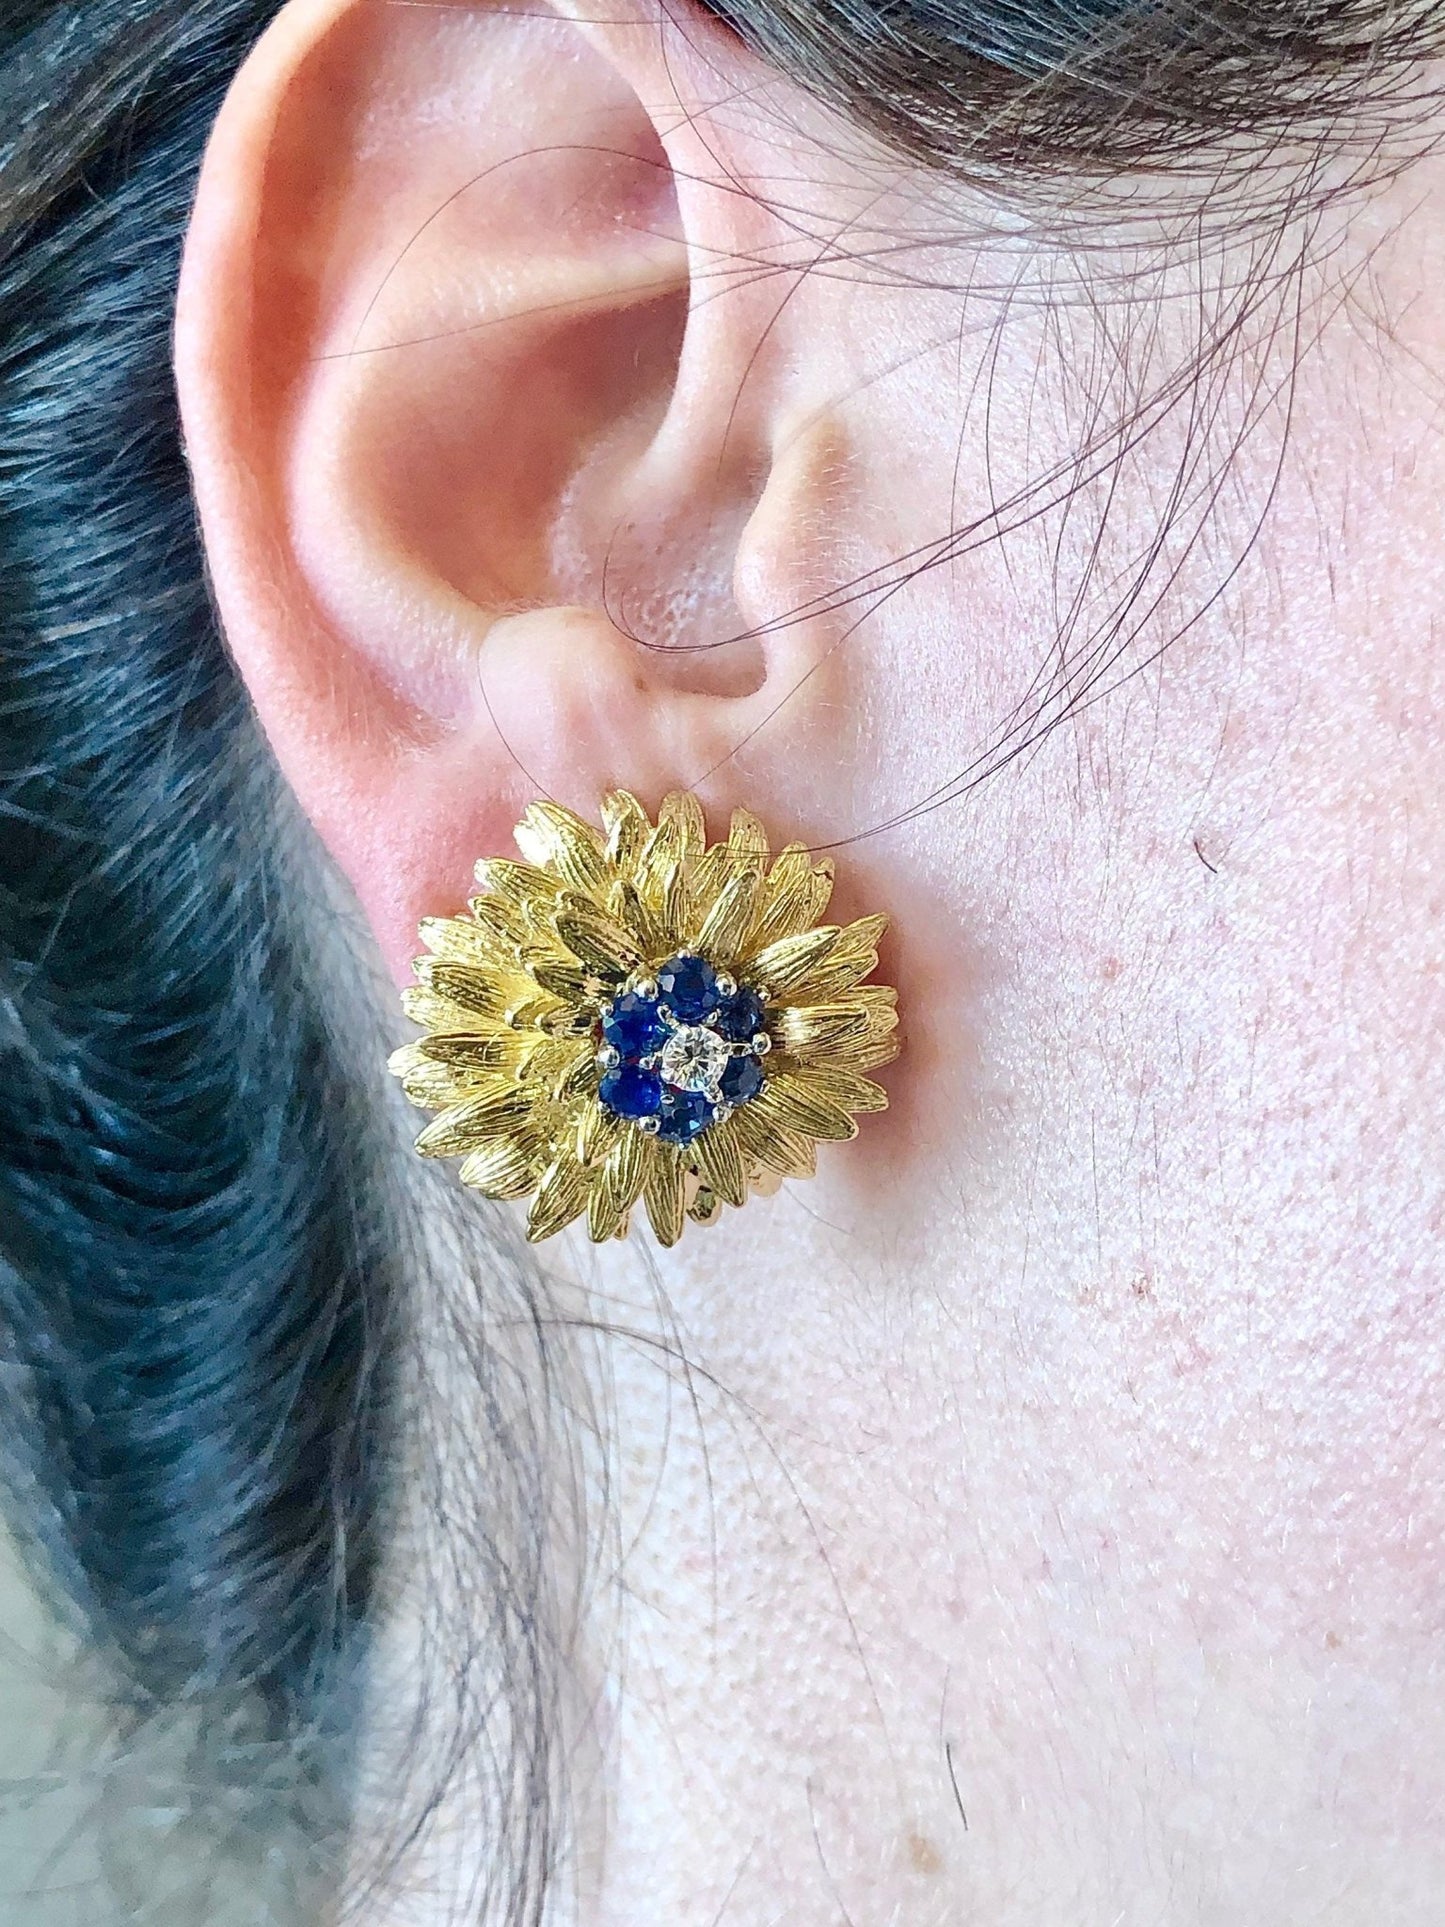 Magnificent Vintage 18K Sapphire & Diamond Flower Earrings - Handcrafted Yellow Gold - Sapphire Earrings - Holiday Gift - Birthday Gift